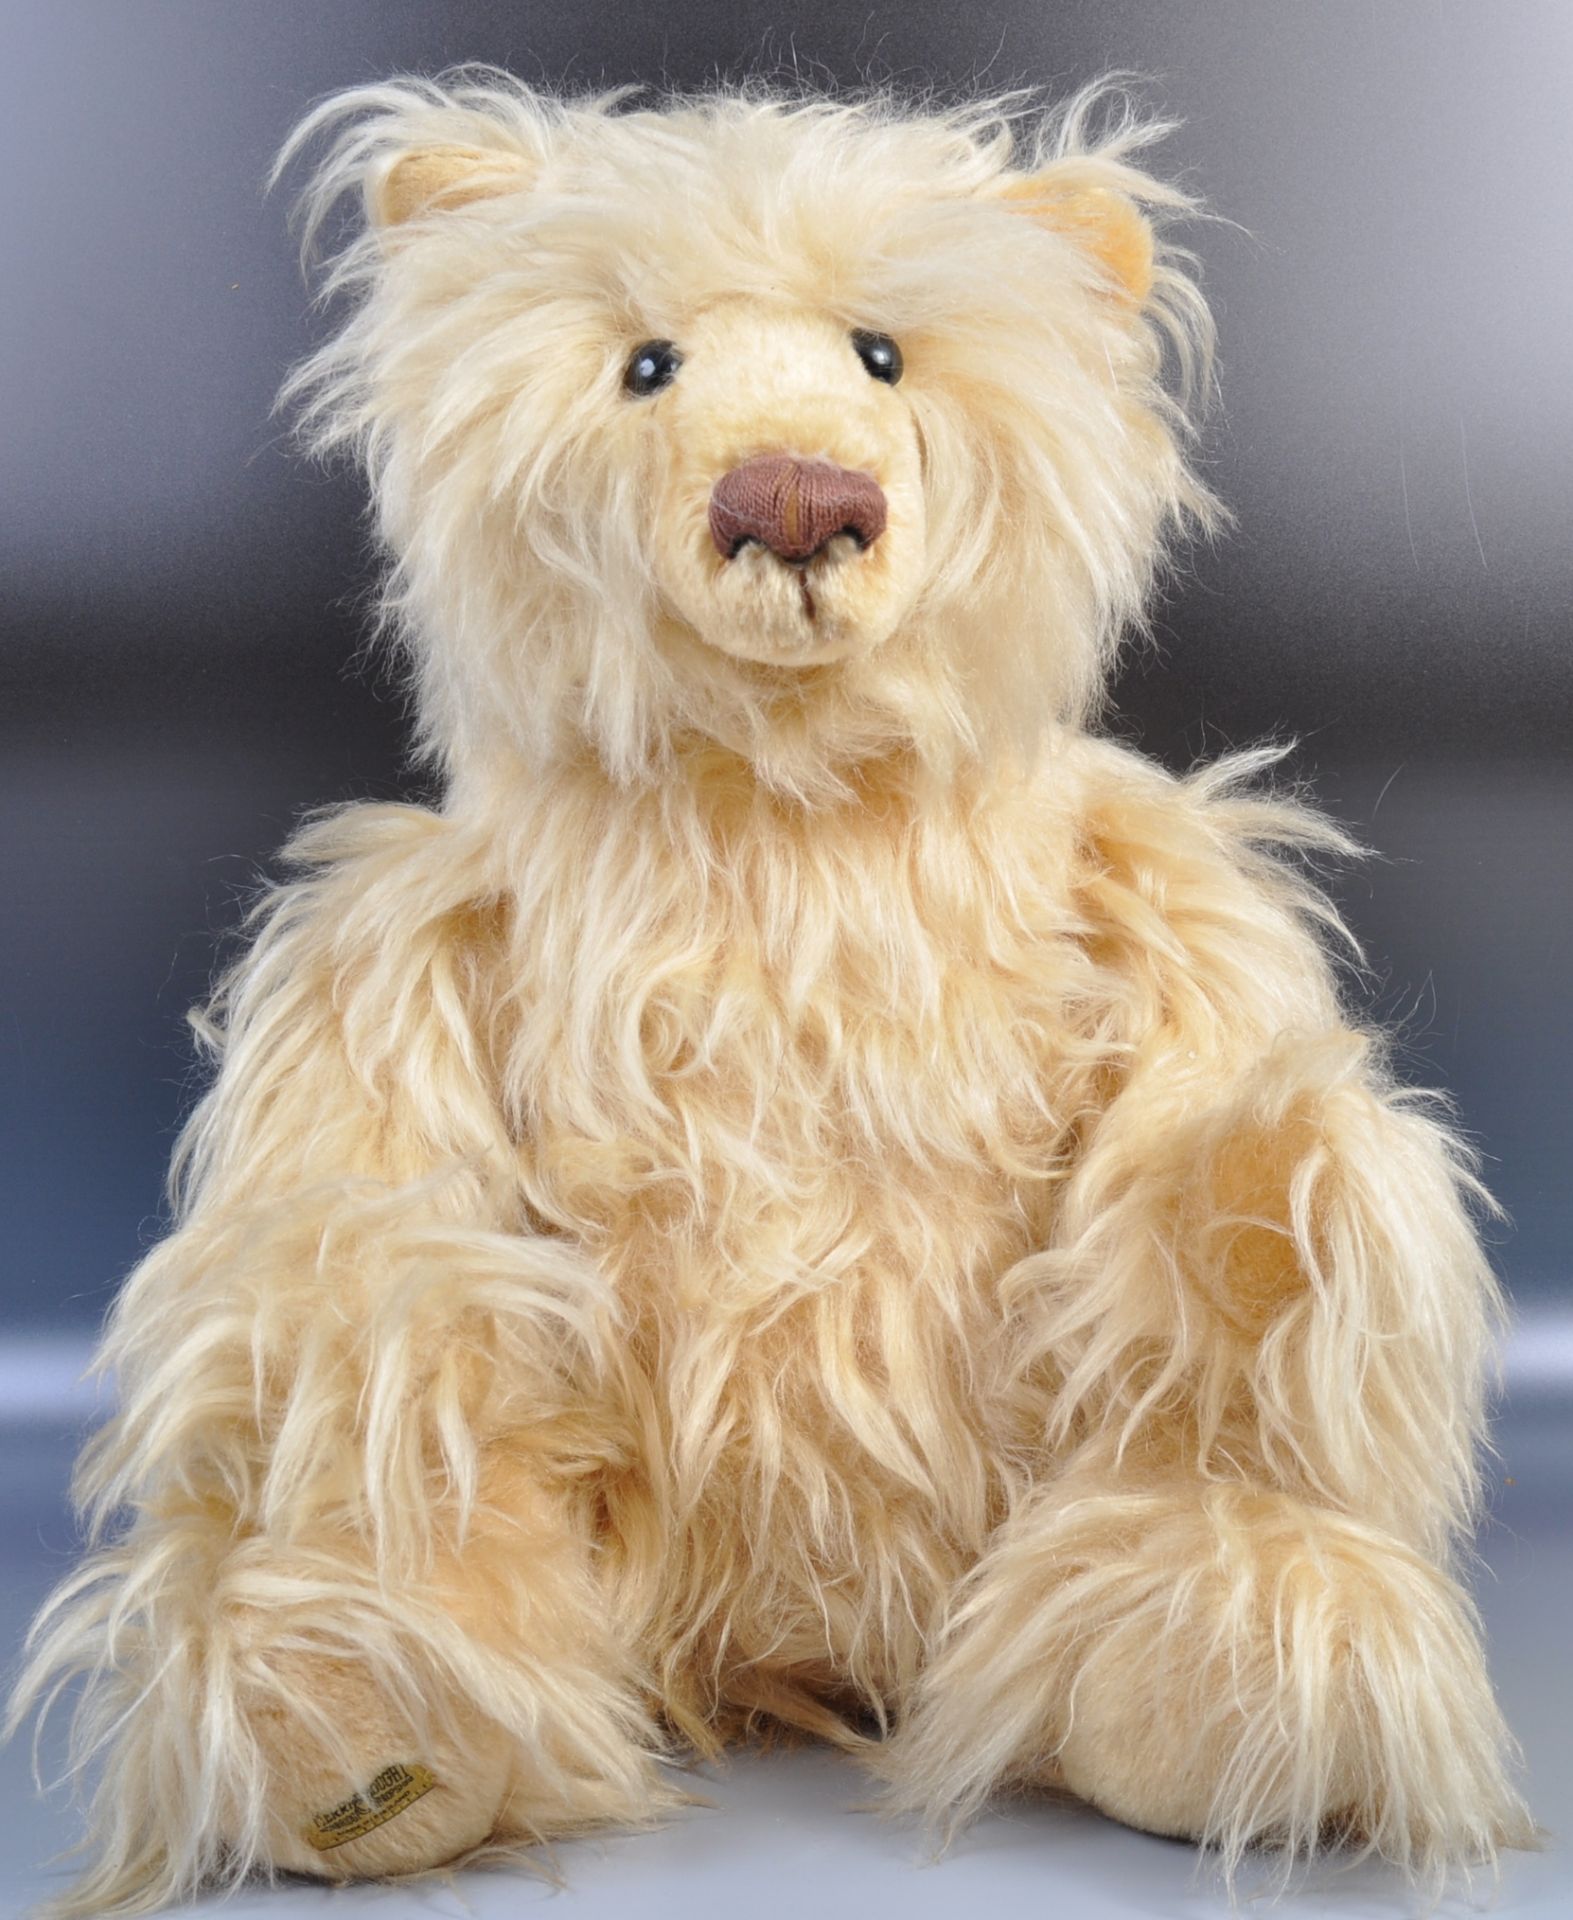 LIMITED EDITION MERRYTHOUGHT LONG HAIR TEDDY BEAR WITH GROWLER